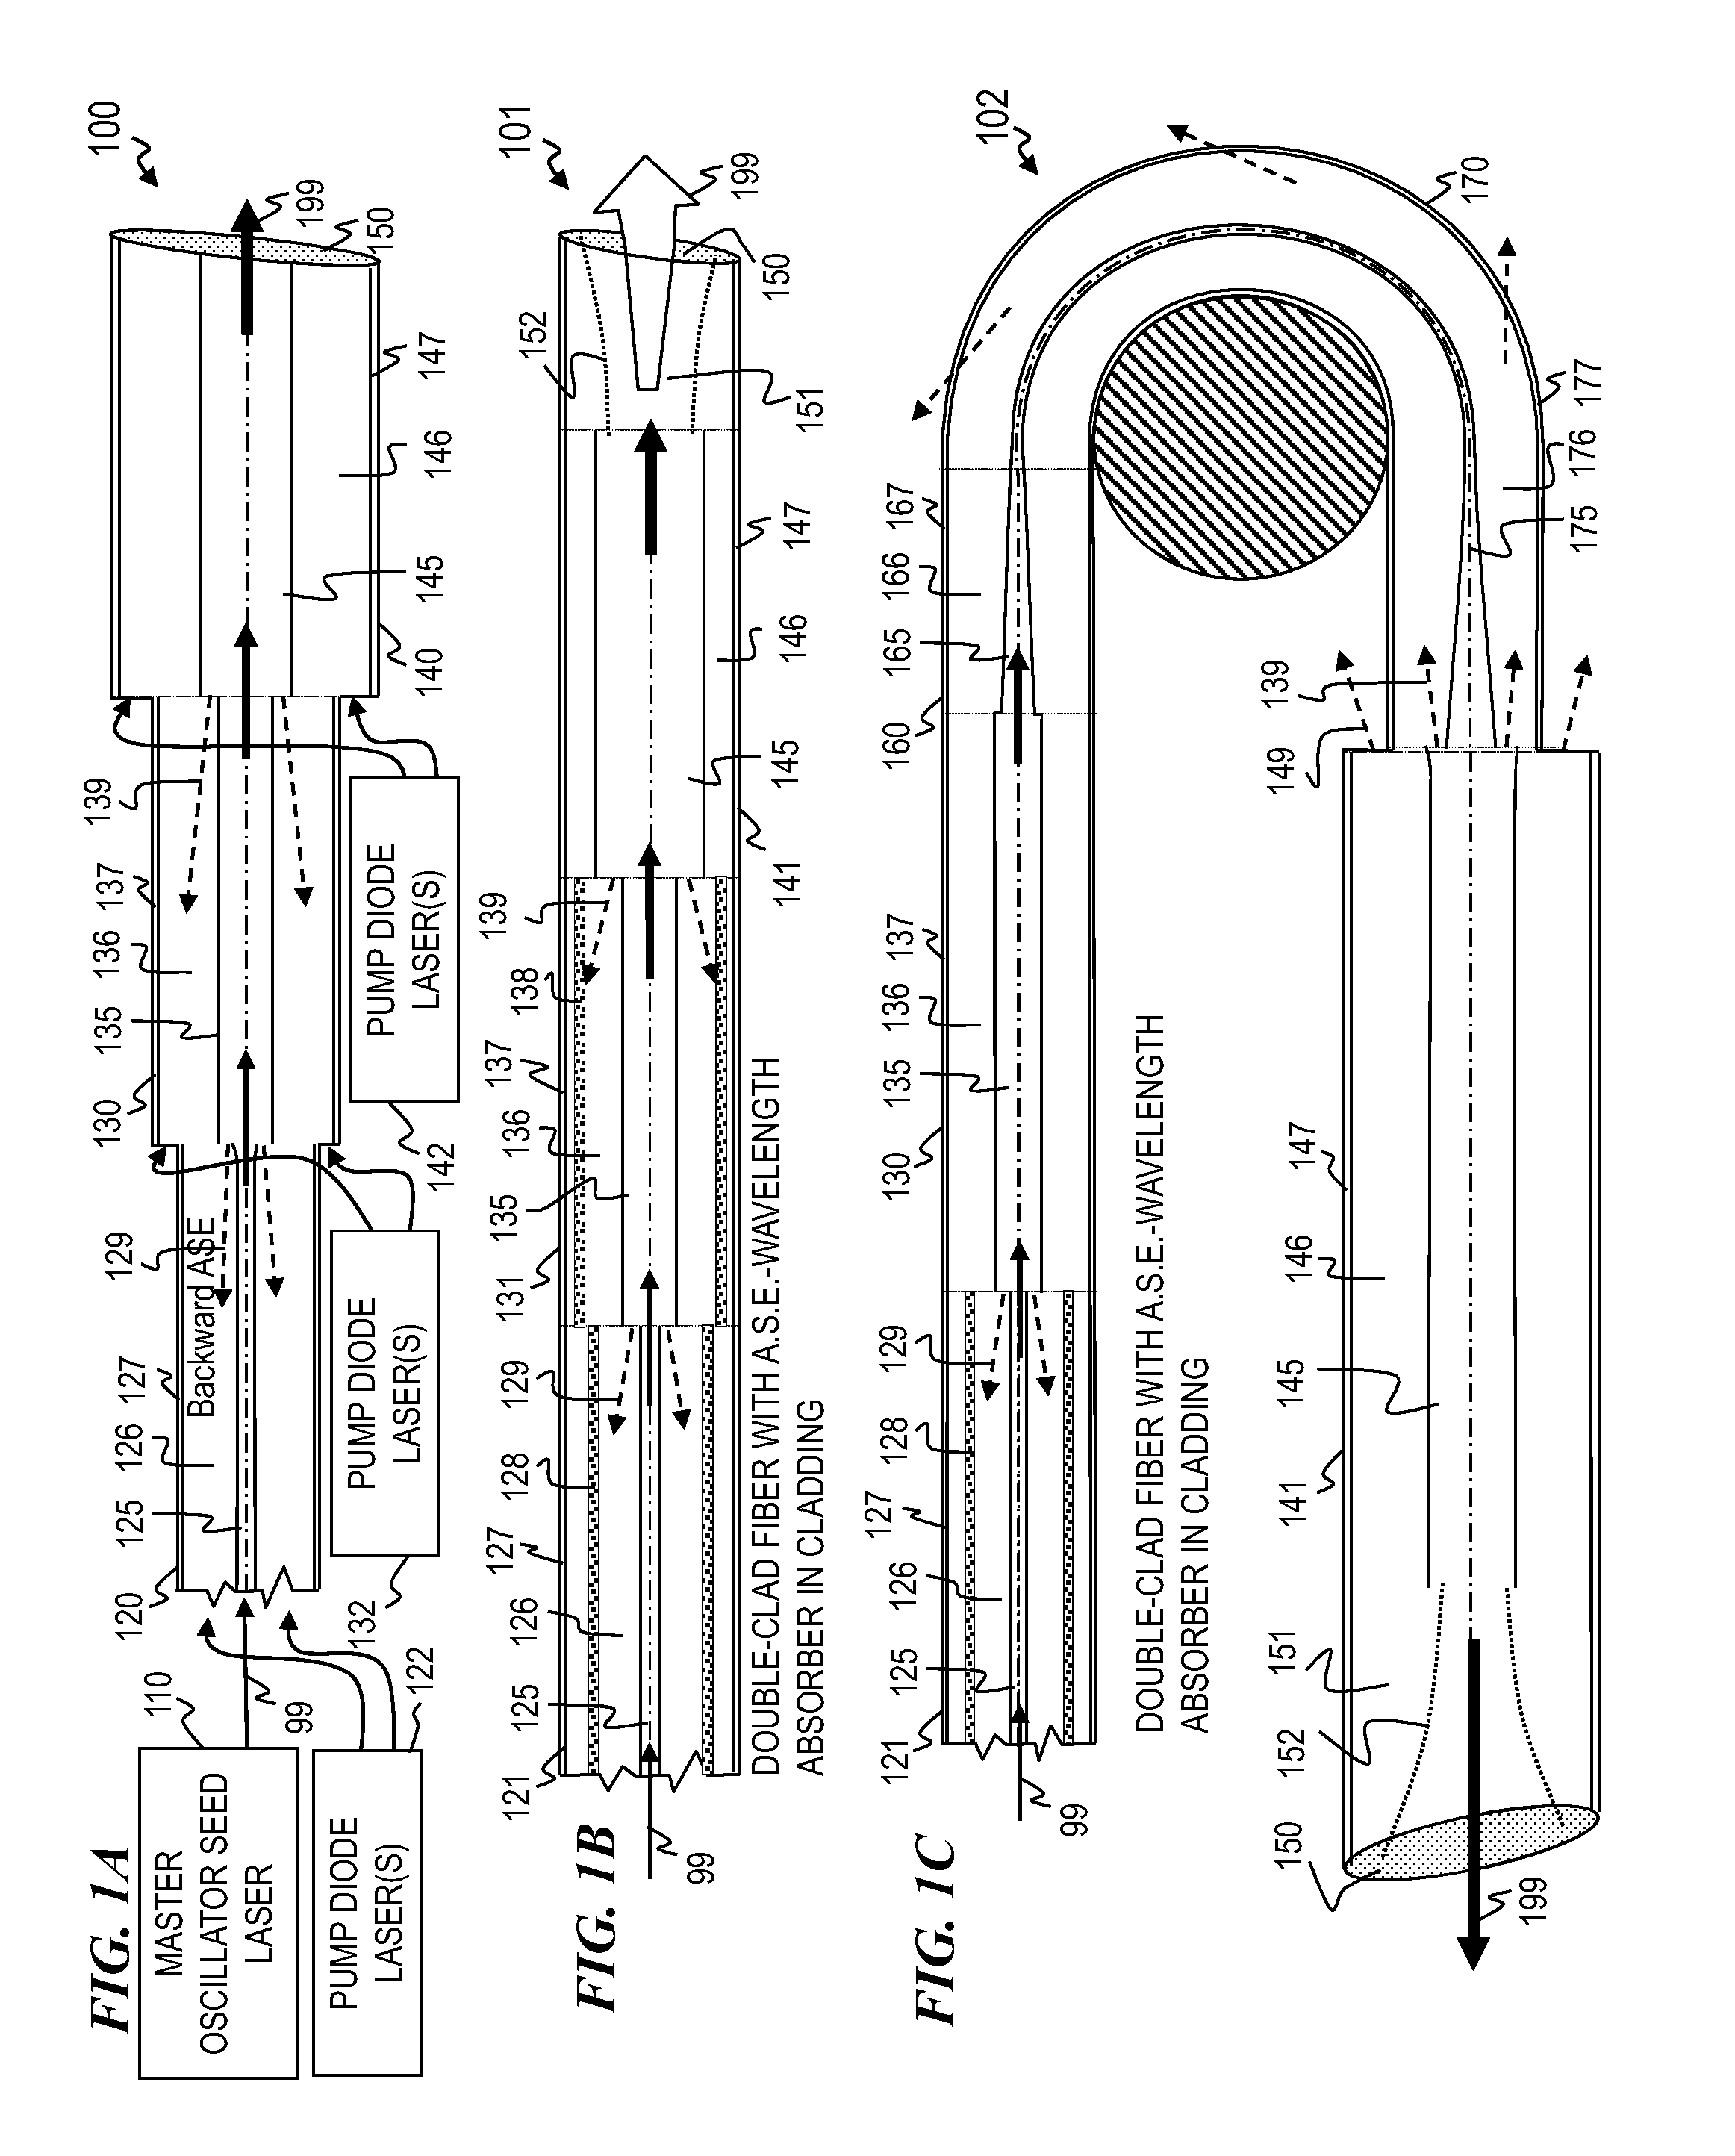 Optical gain fiber having segments of differing core sizes and associated method